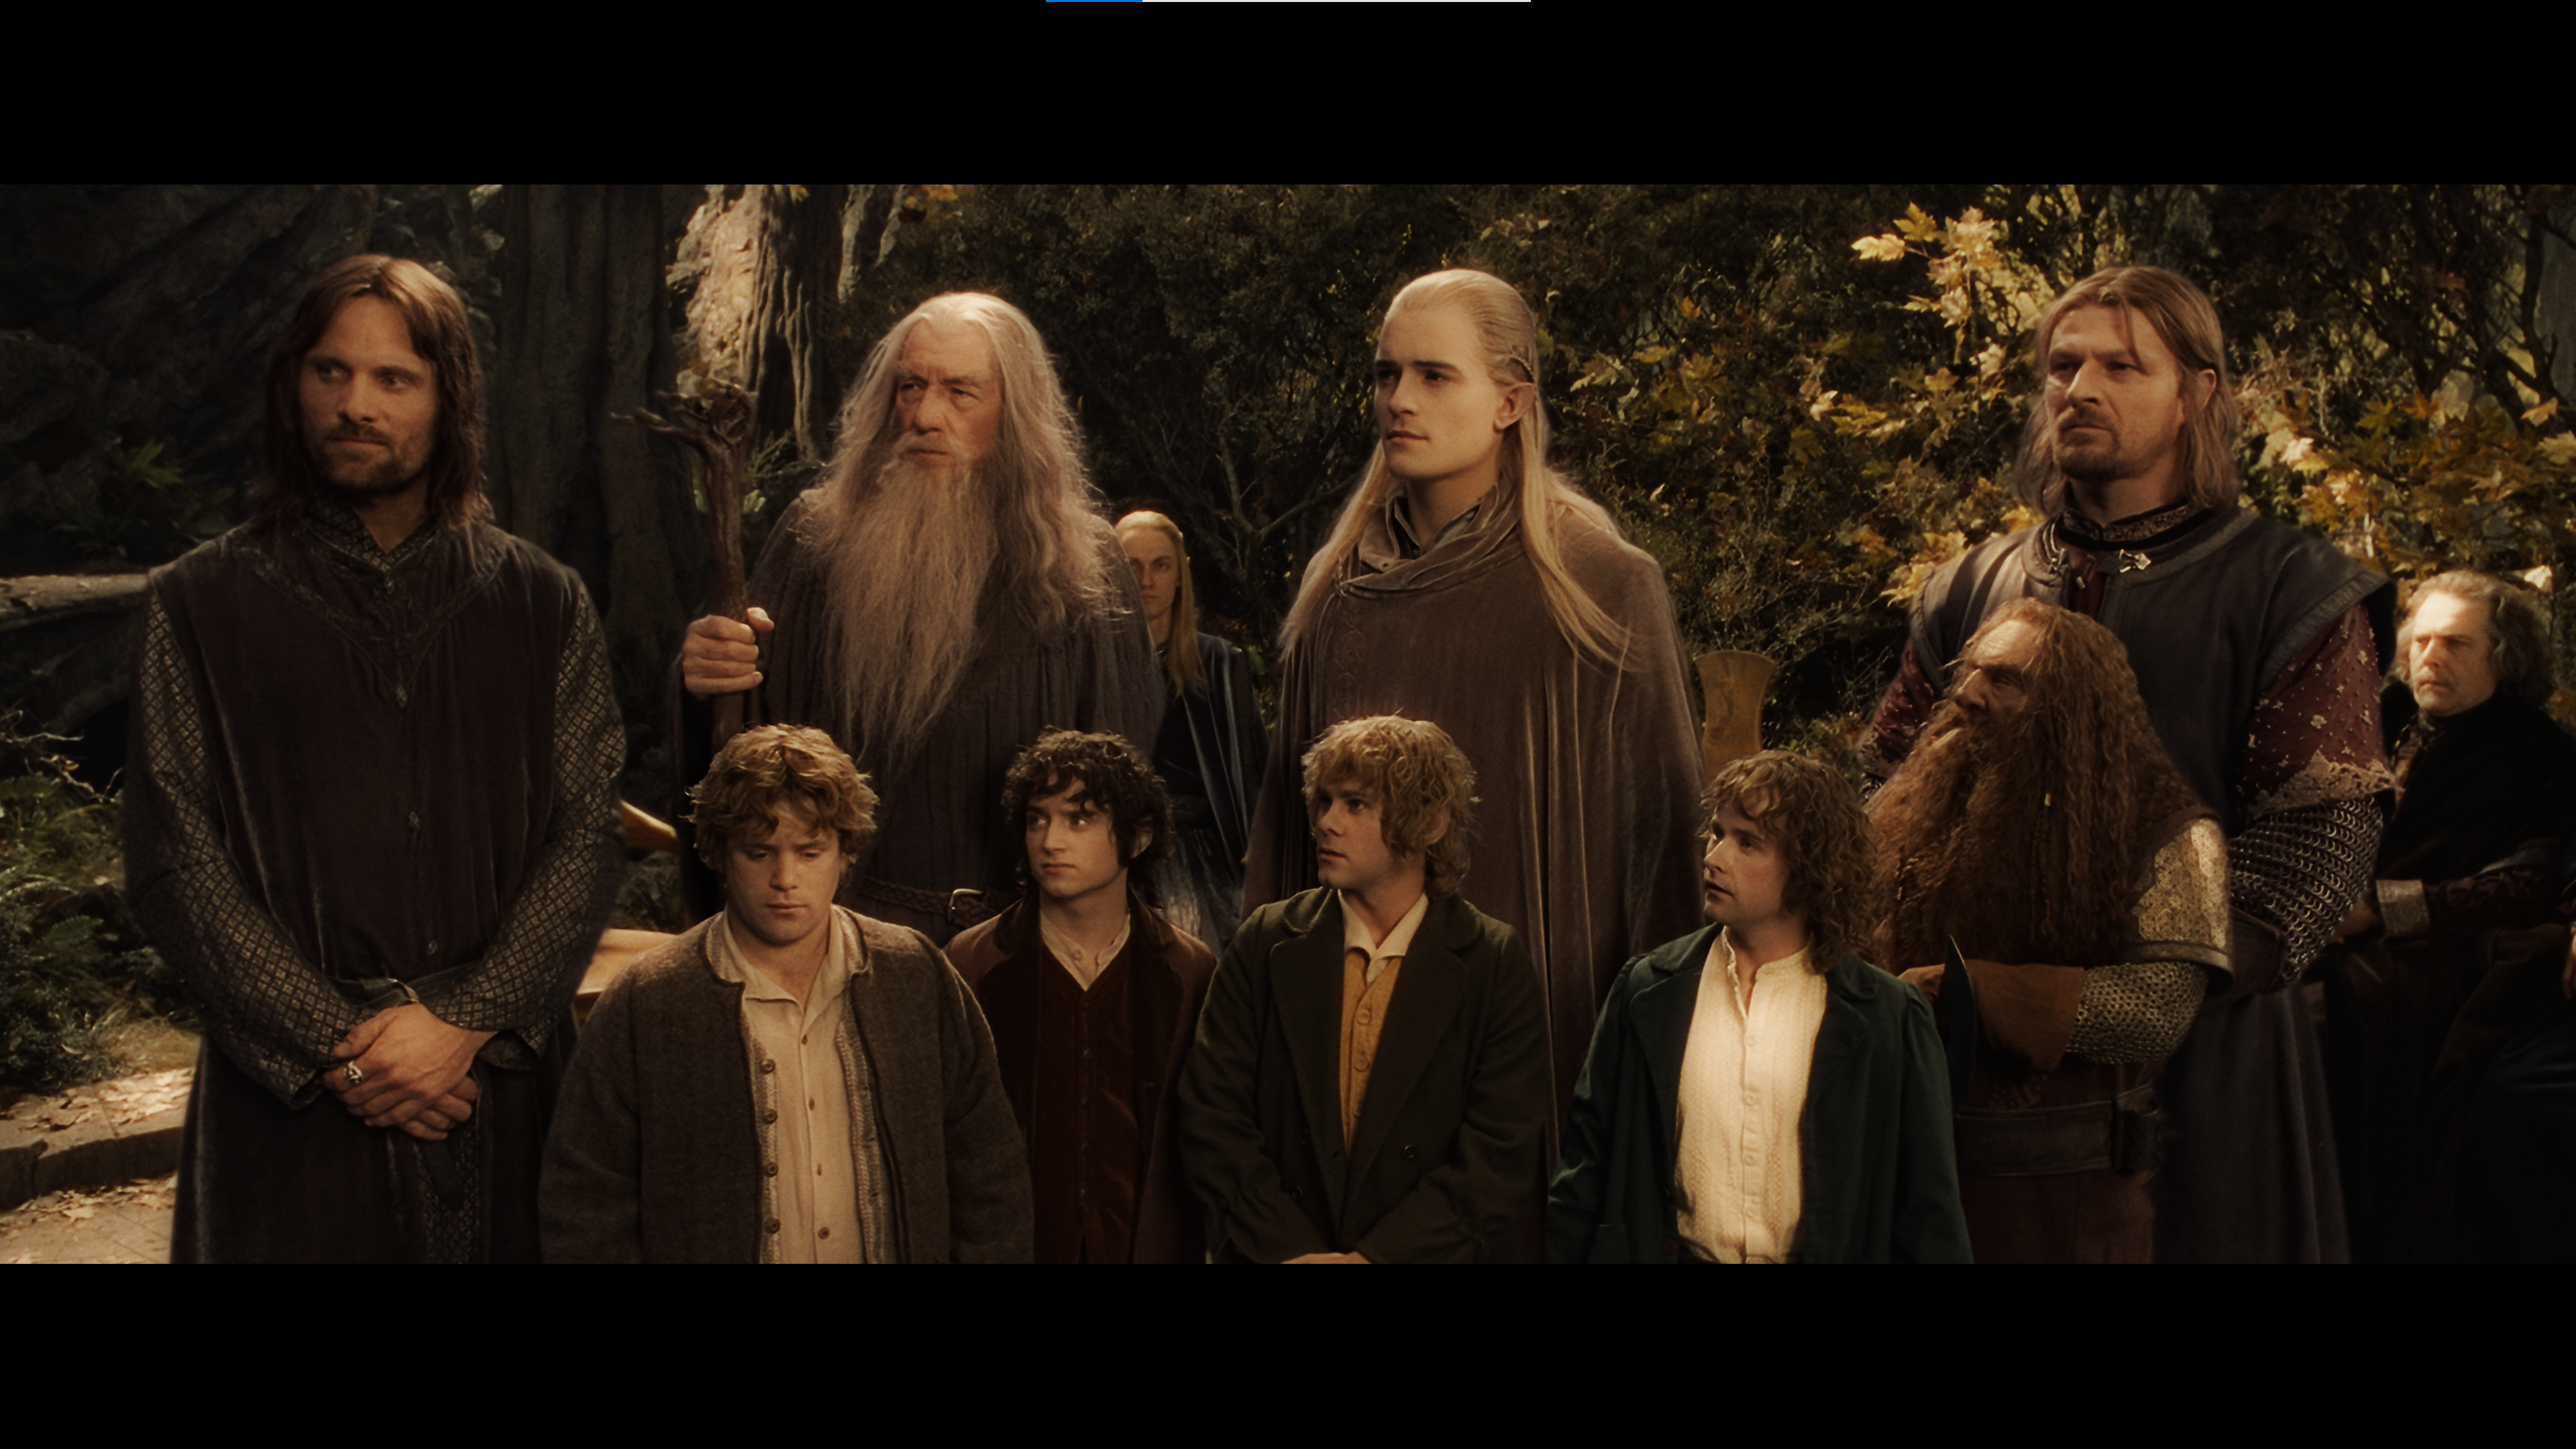 The Lord of Rings: The Fellowship of the Ring - UHD Blu-ray Ultra HD Review | High Def Digest